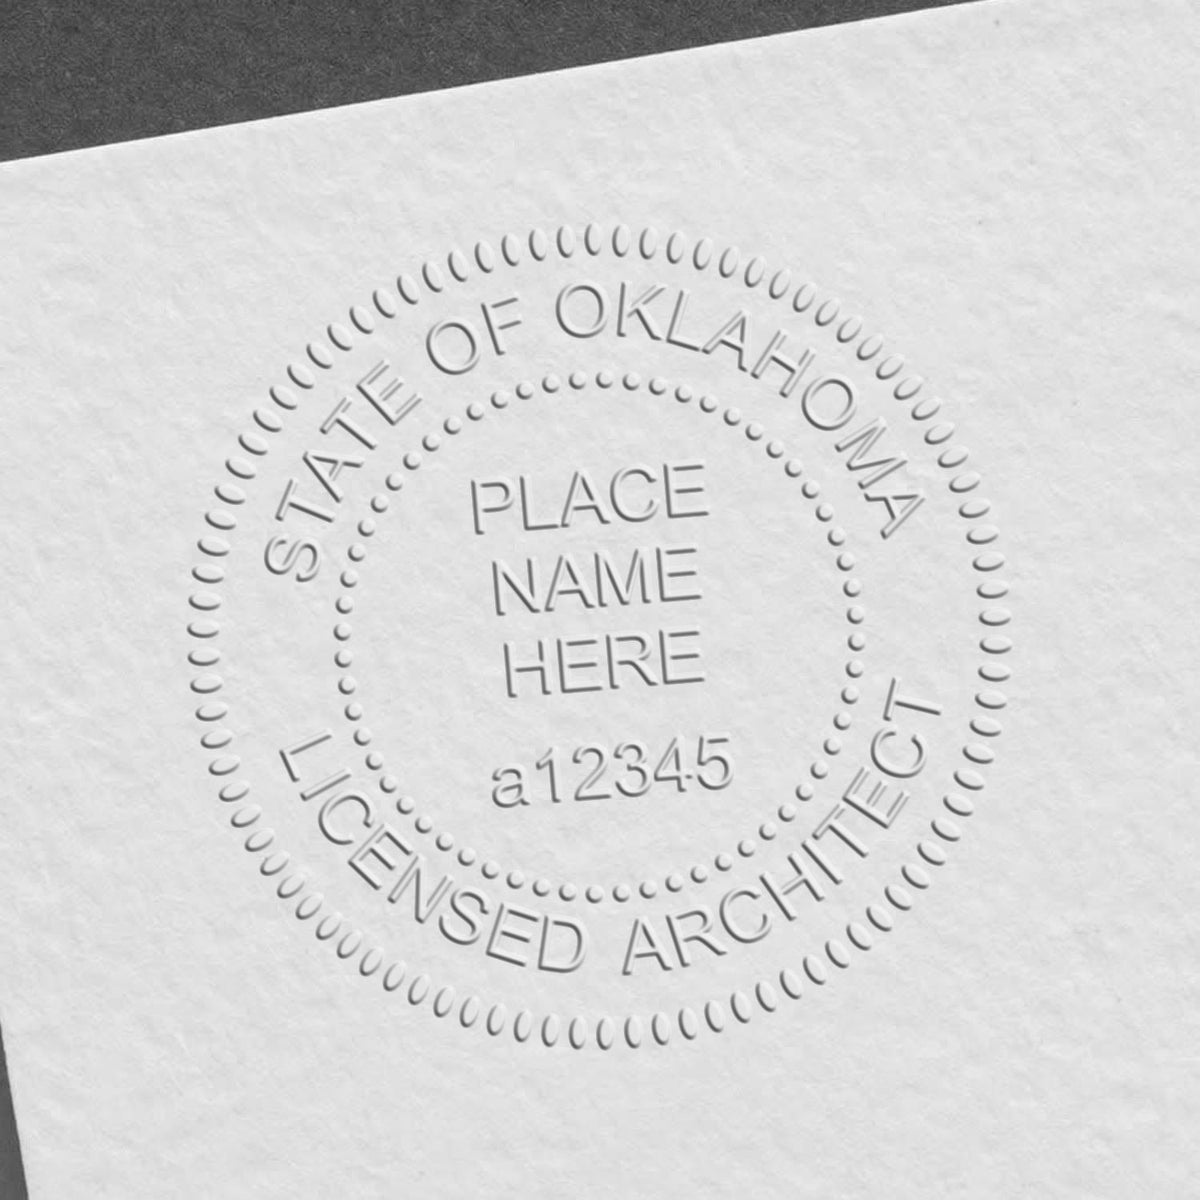 The State of Oklahoma Long Reach Architectural Embossing Seal stamp impression comes to life with a crisp, detailed photo on paper - showcasing true professional quality.